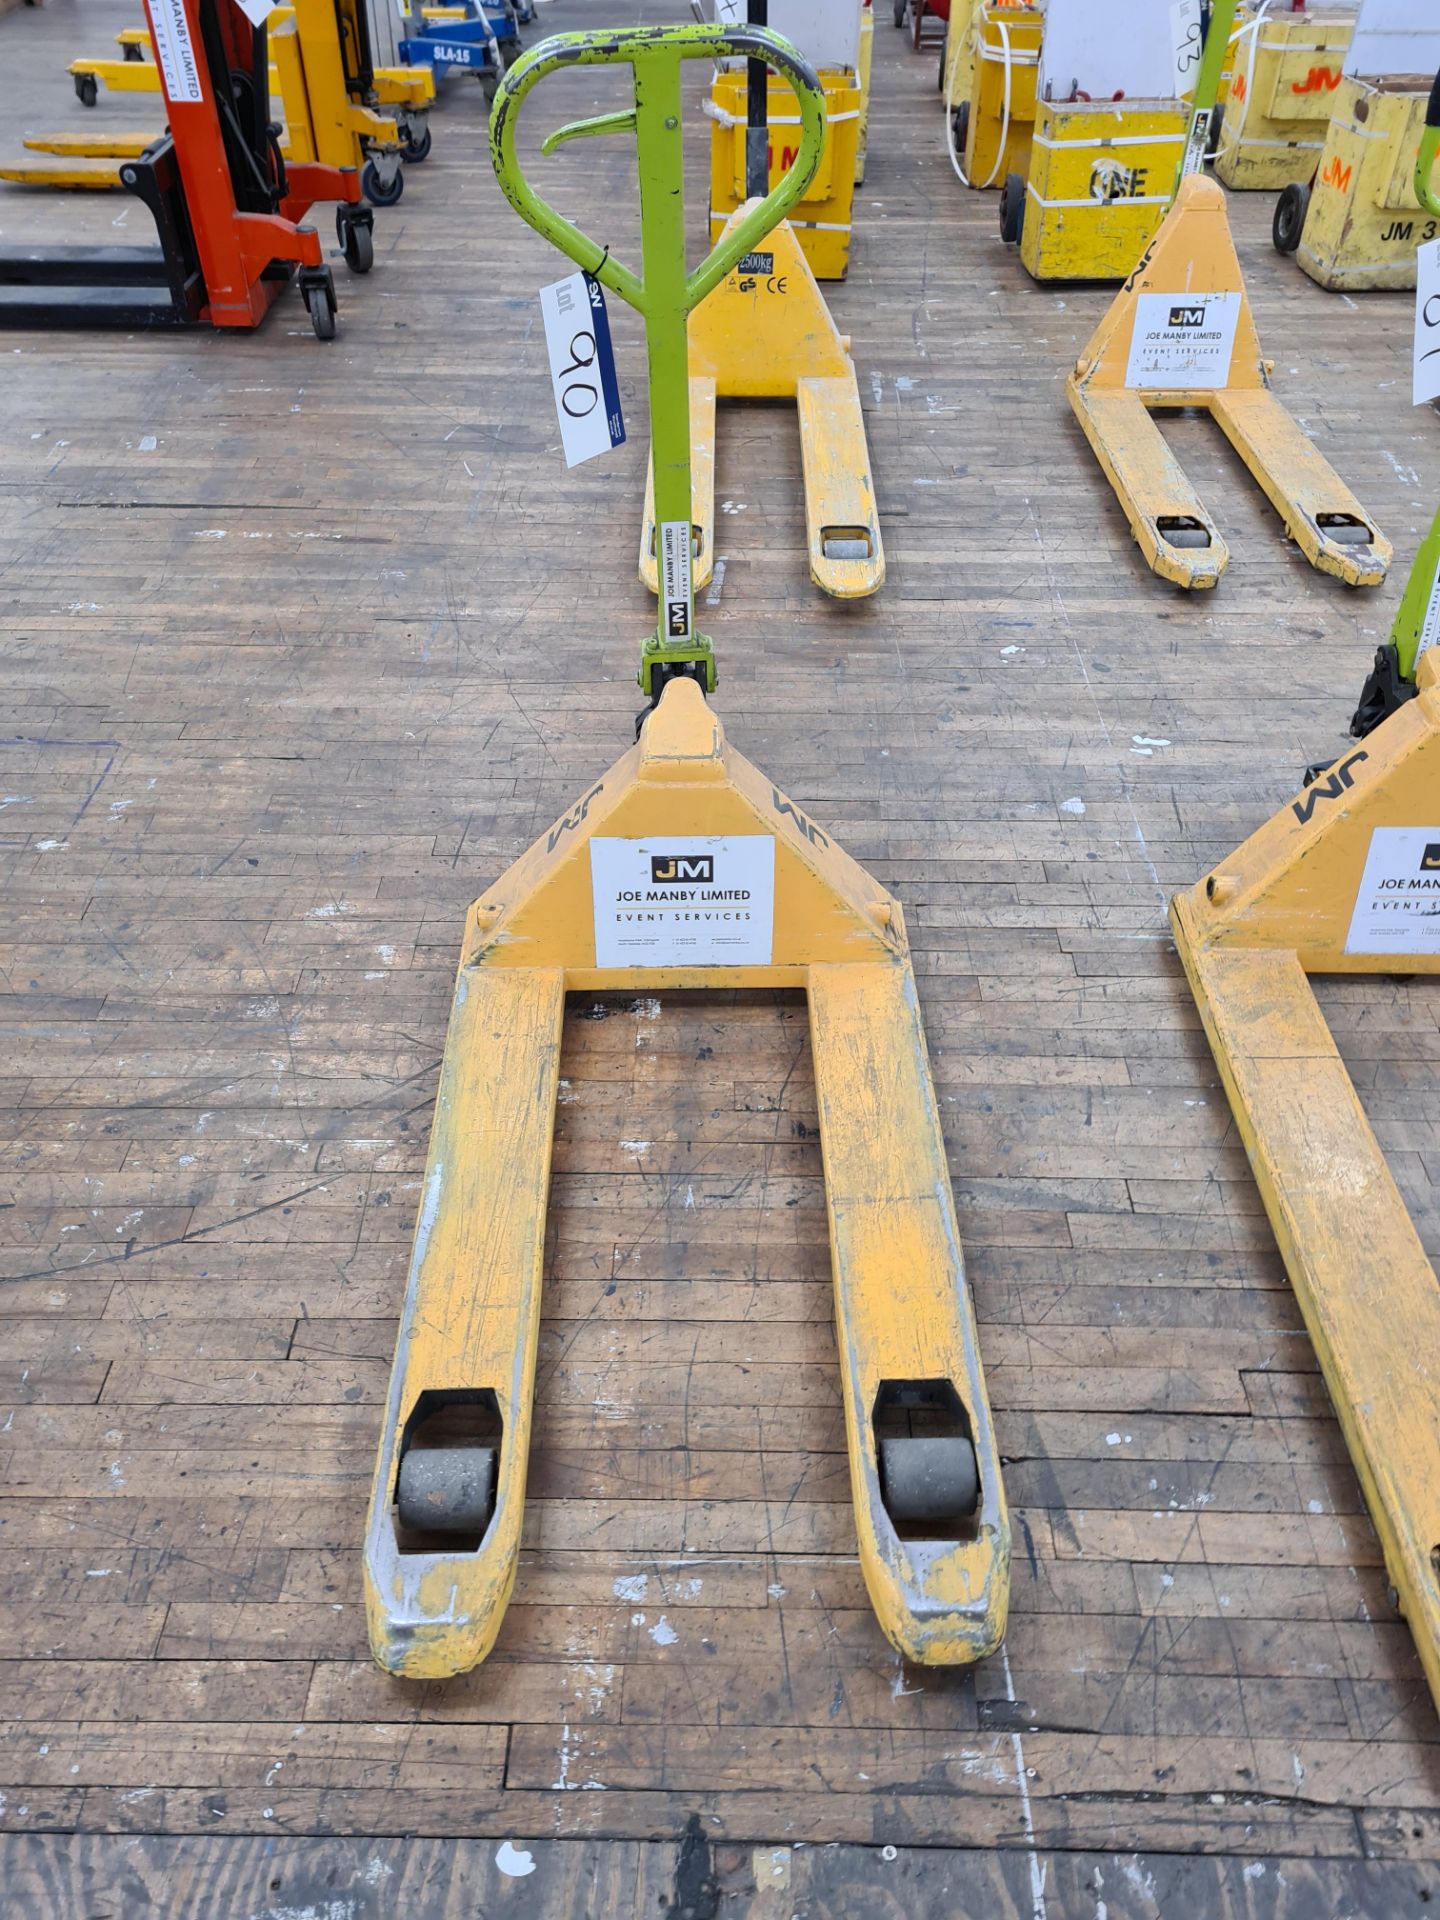 Hand Hydraulic Pallet Truck, forks approx. 1m long